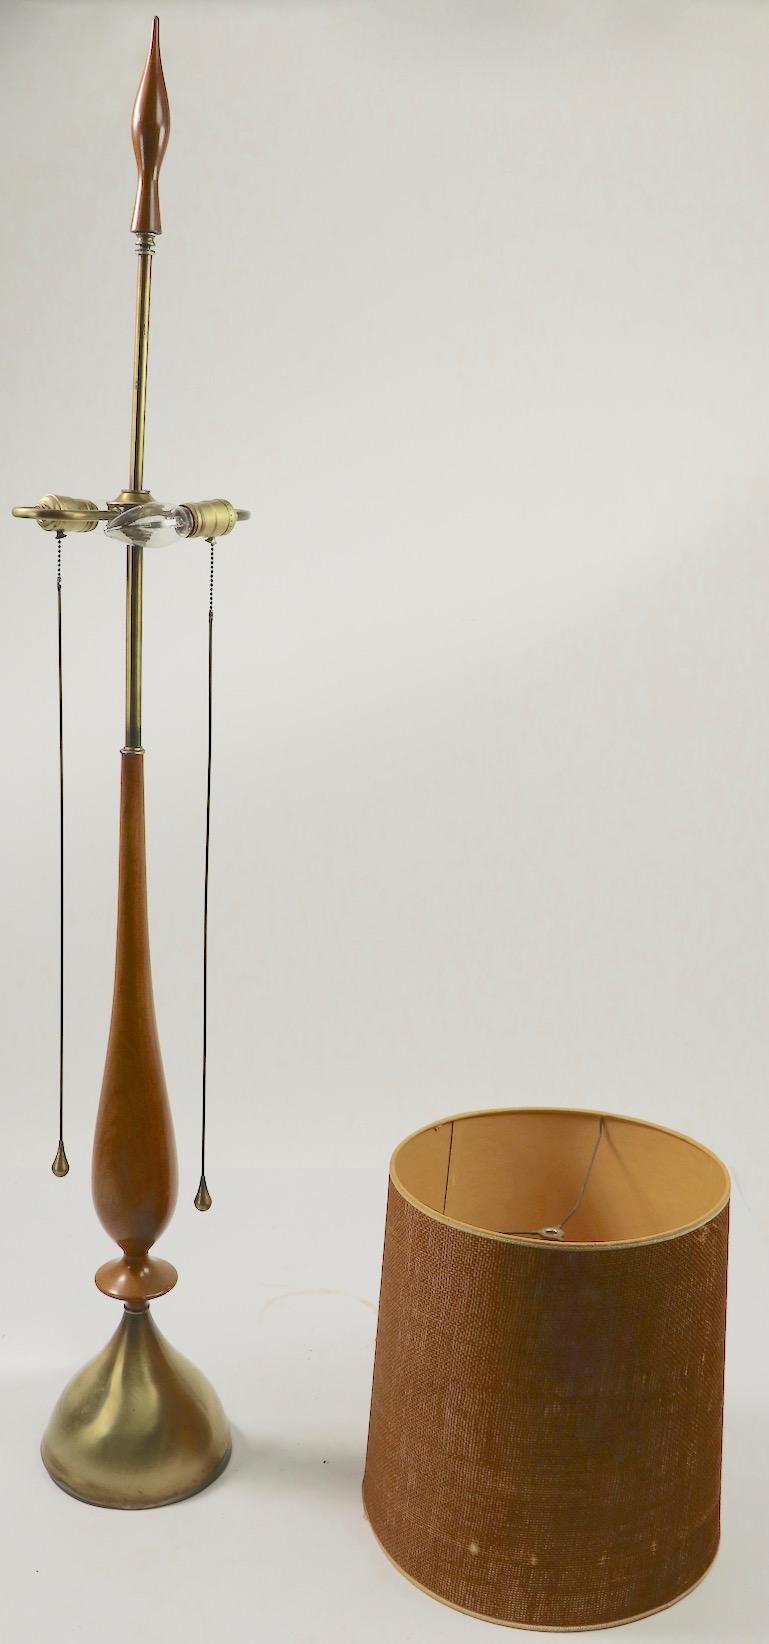 Exceptional elongated mid century table lamp designed by Tony Paul for Westwood Industries. This example is in very good, original and working condition, shade included but shows minor damage.
Measures: Diameter of base 8 x diameter of Shade 13.5 x